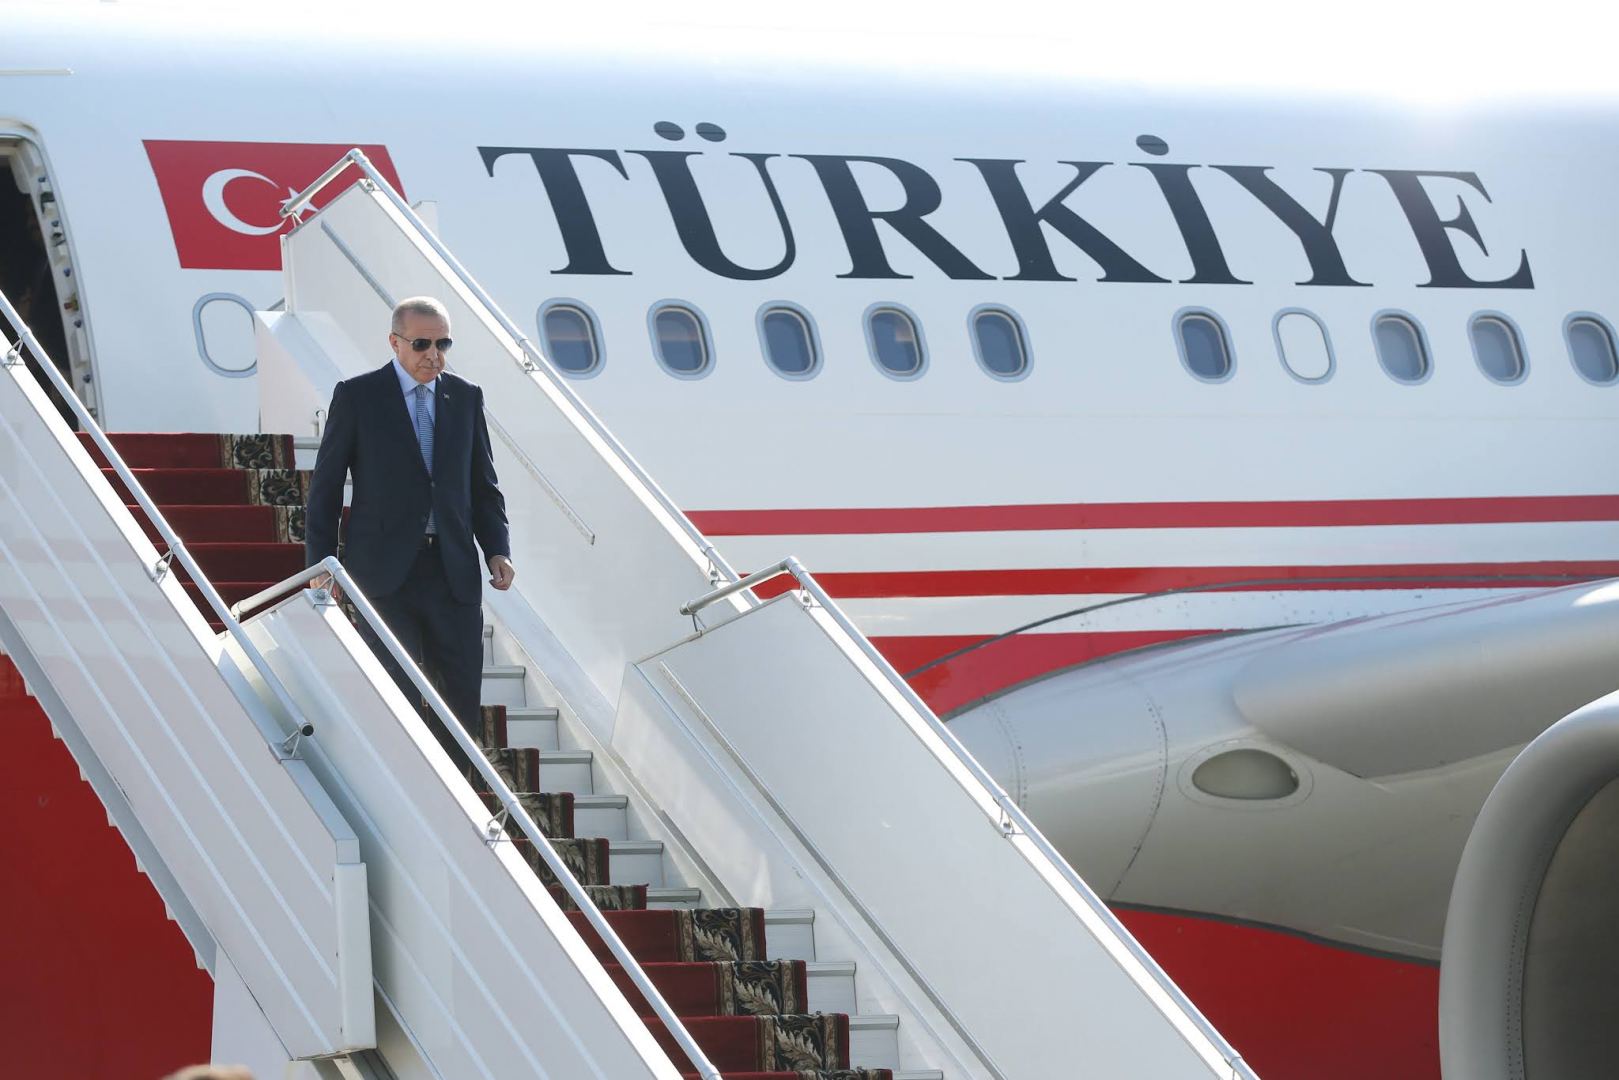 Erdogan arrives in Angola in first leg of Africa tour